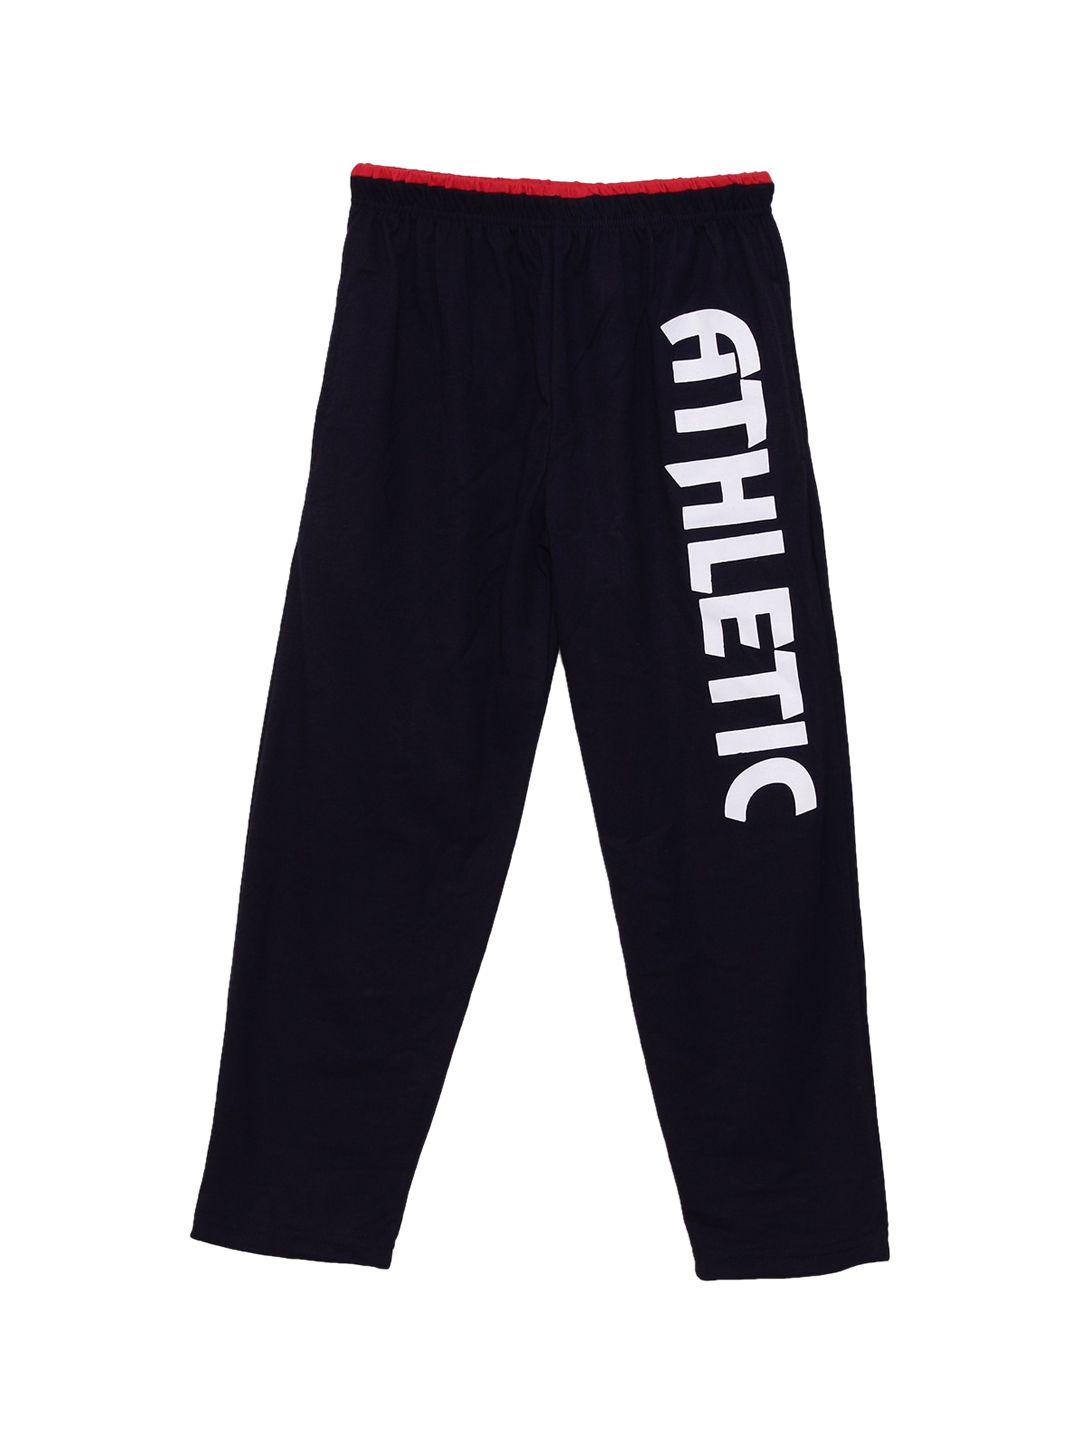 Fashionable Boys Navy Blue & White Printed Pure Cotton Track Pants